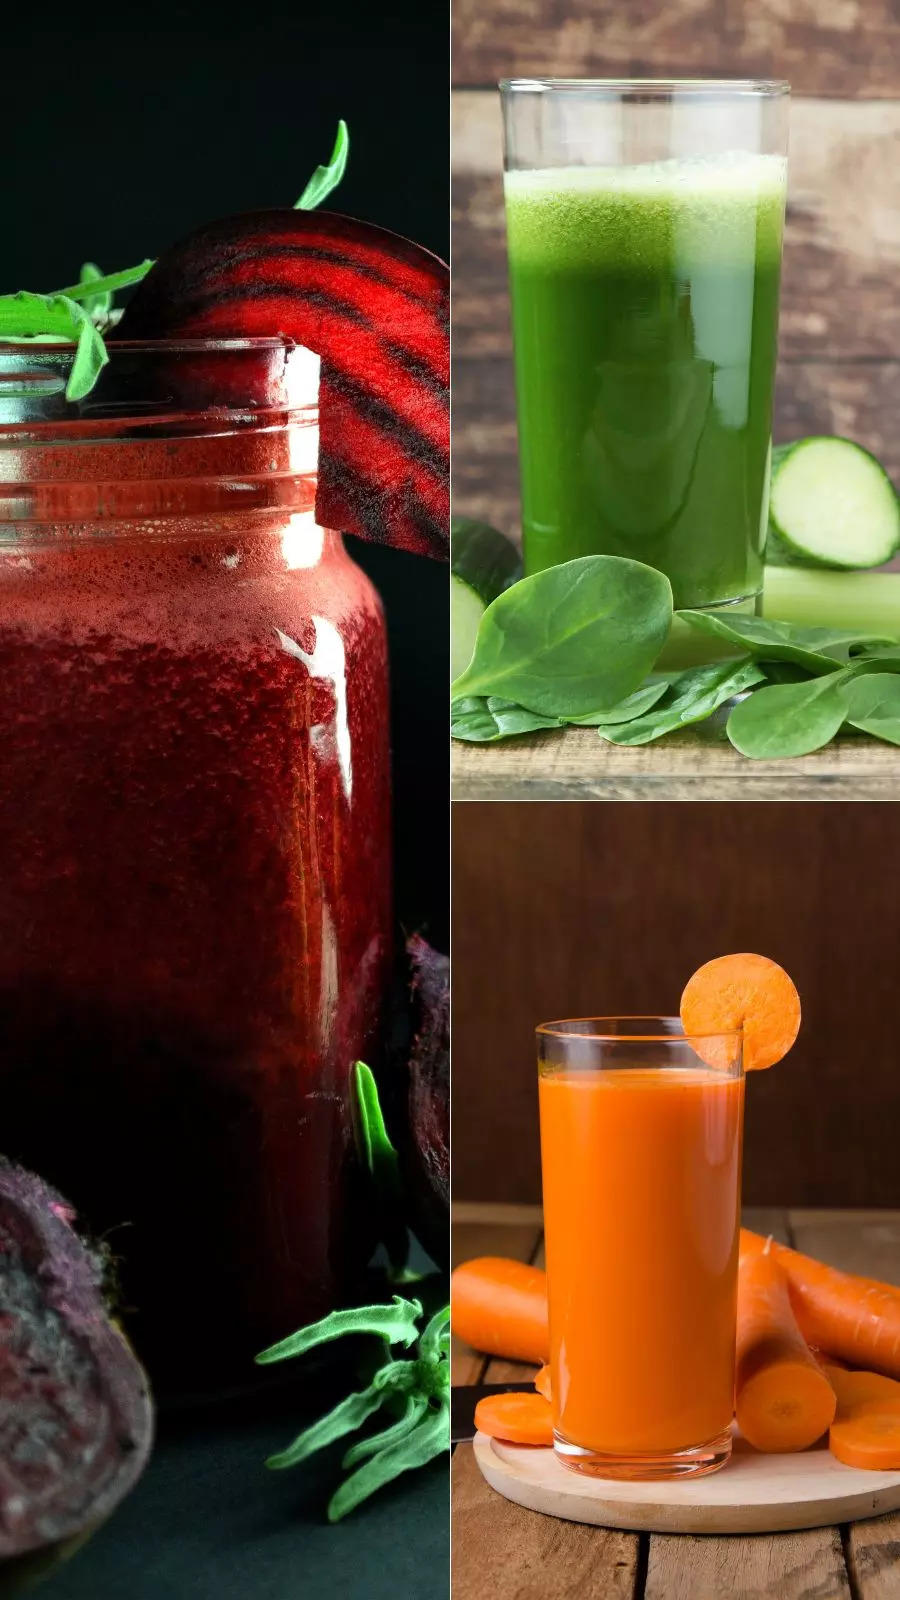 Weight loss drinks: Vegetable juices to shed belly fat